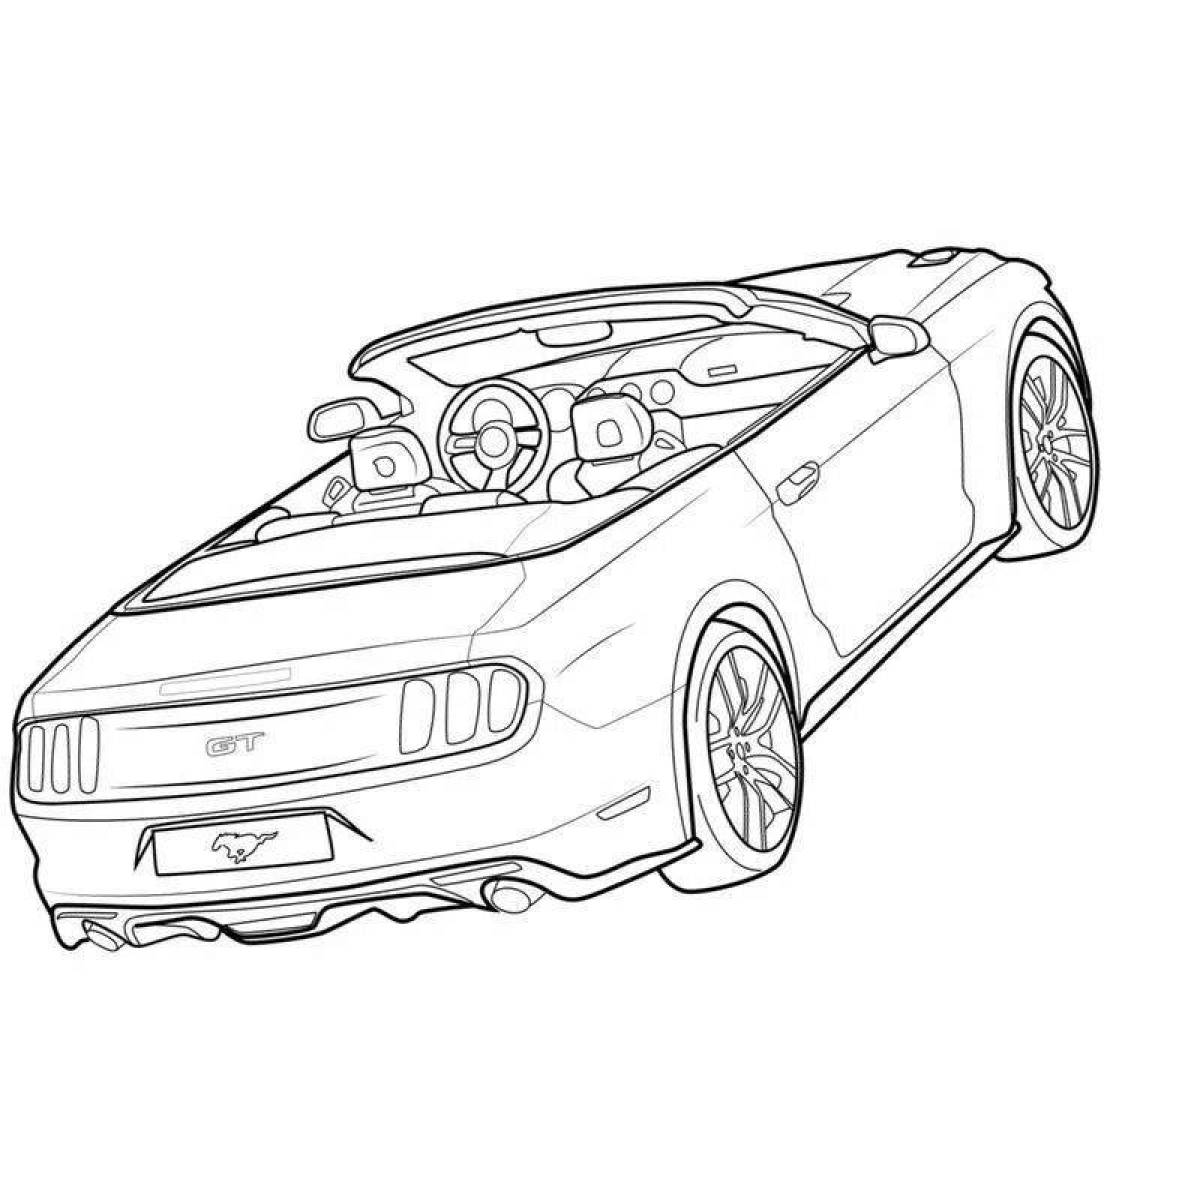 Coloring page gorgeous mustang car